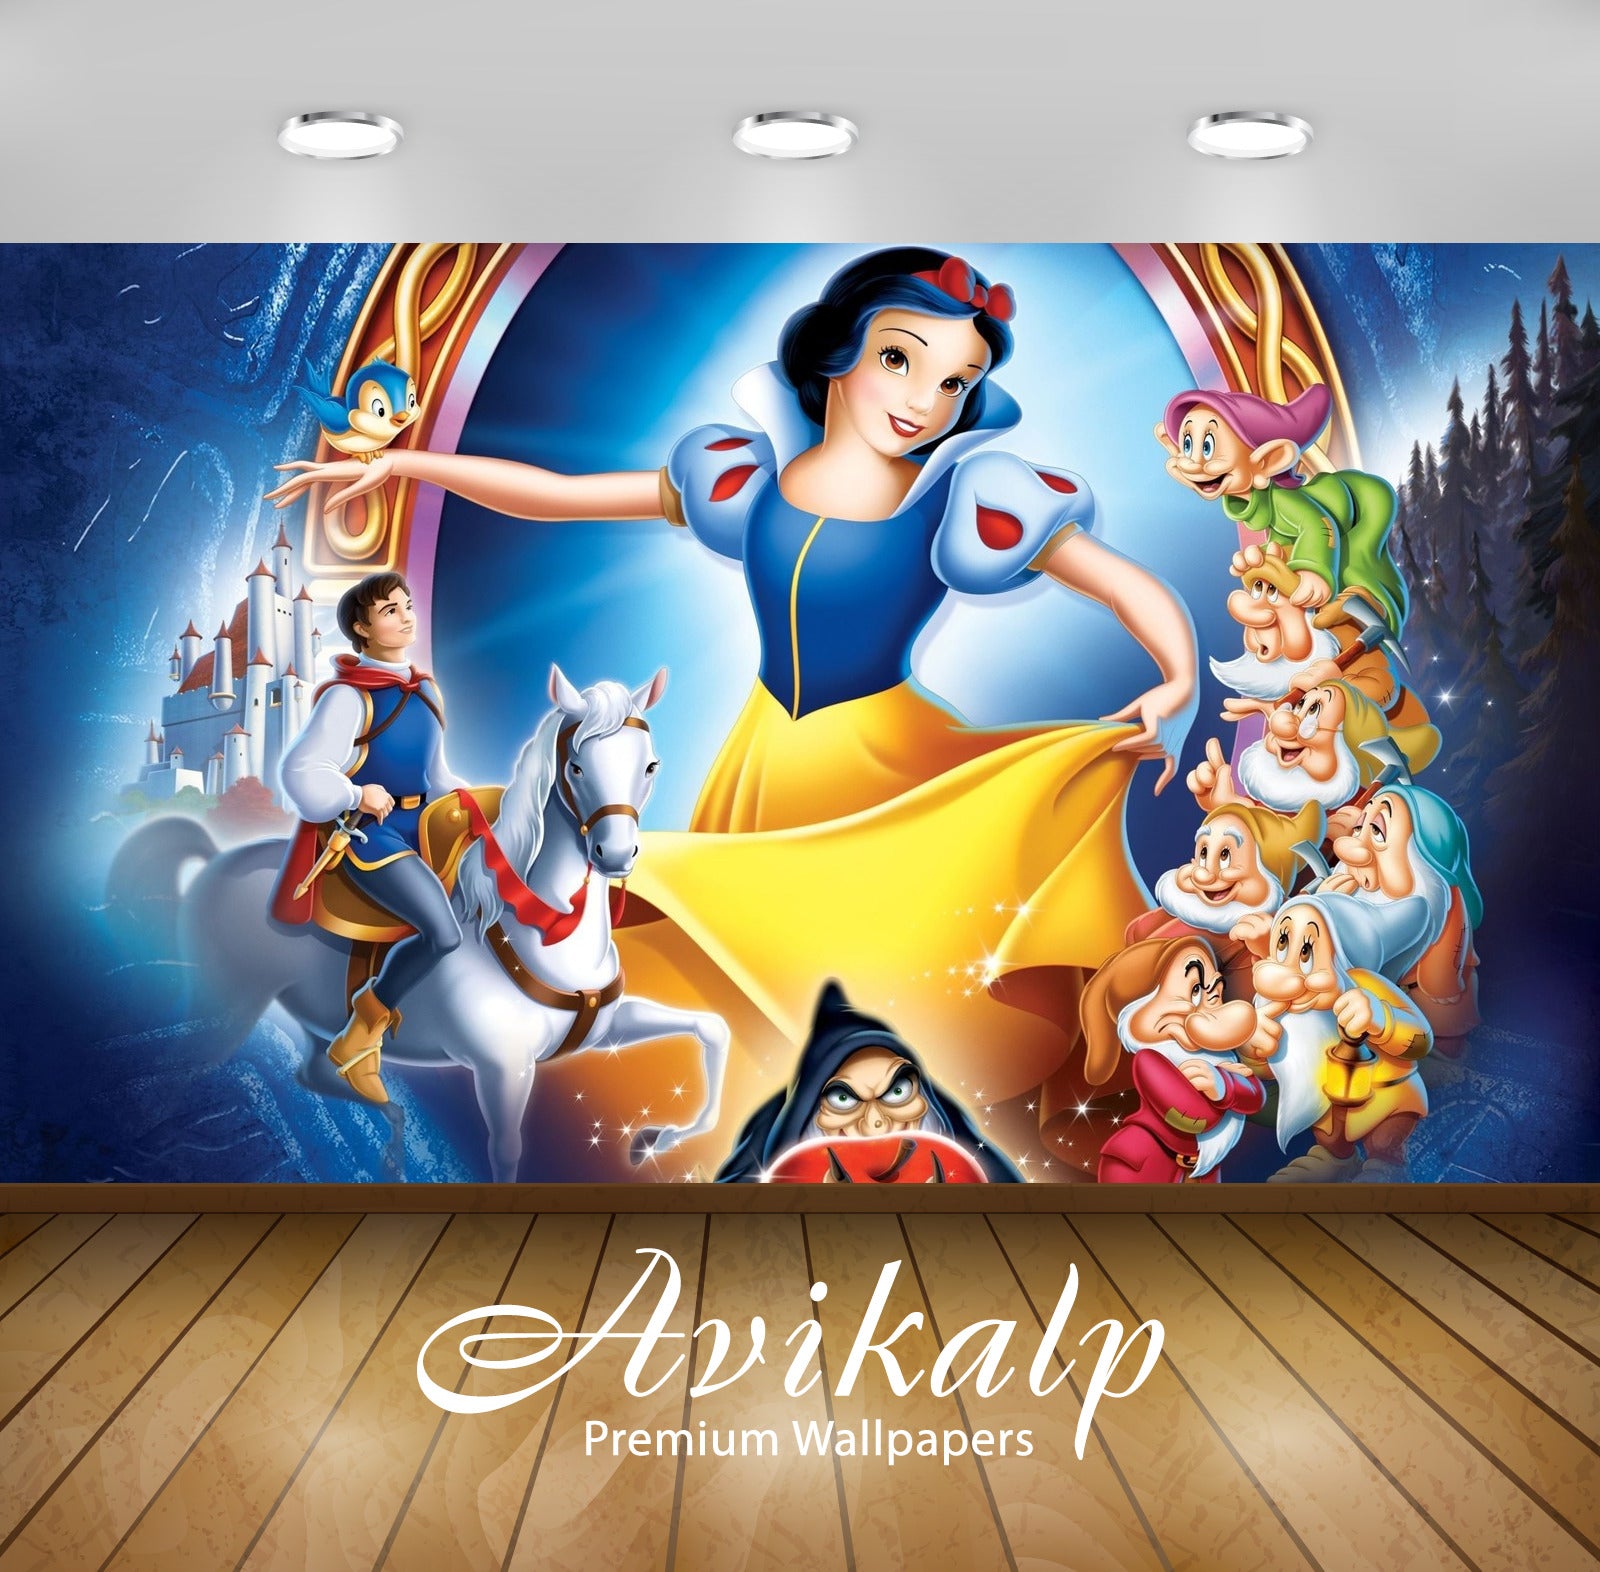 Avikalp Exclusive Awi2007 Snow White And The Seven Dwarfs Full HD Wallpapers for Living room, Hall,